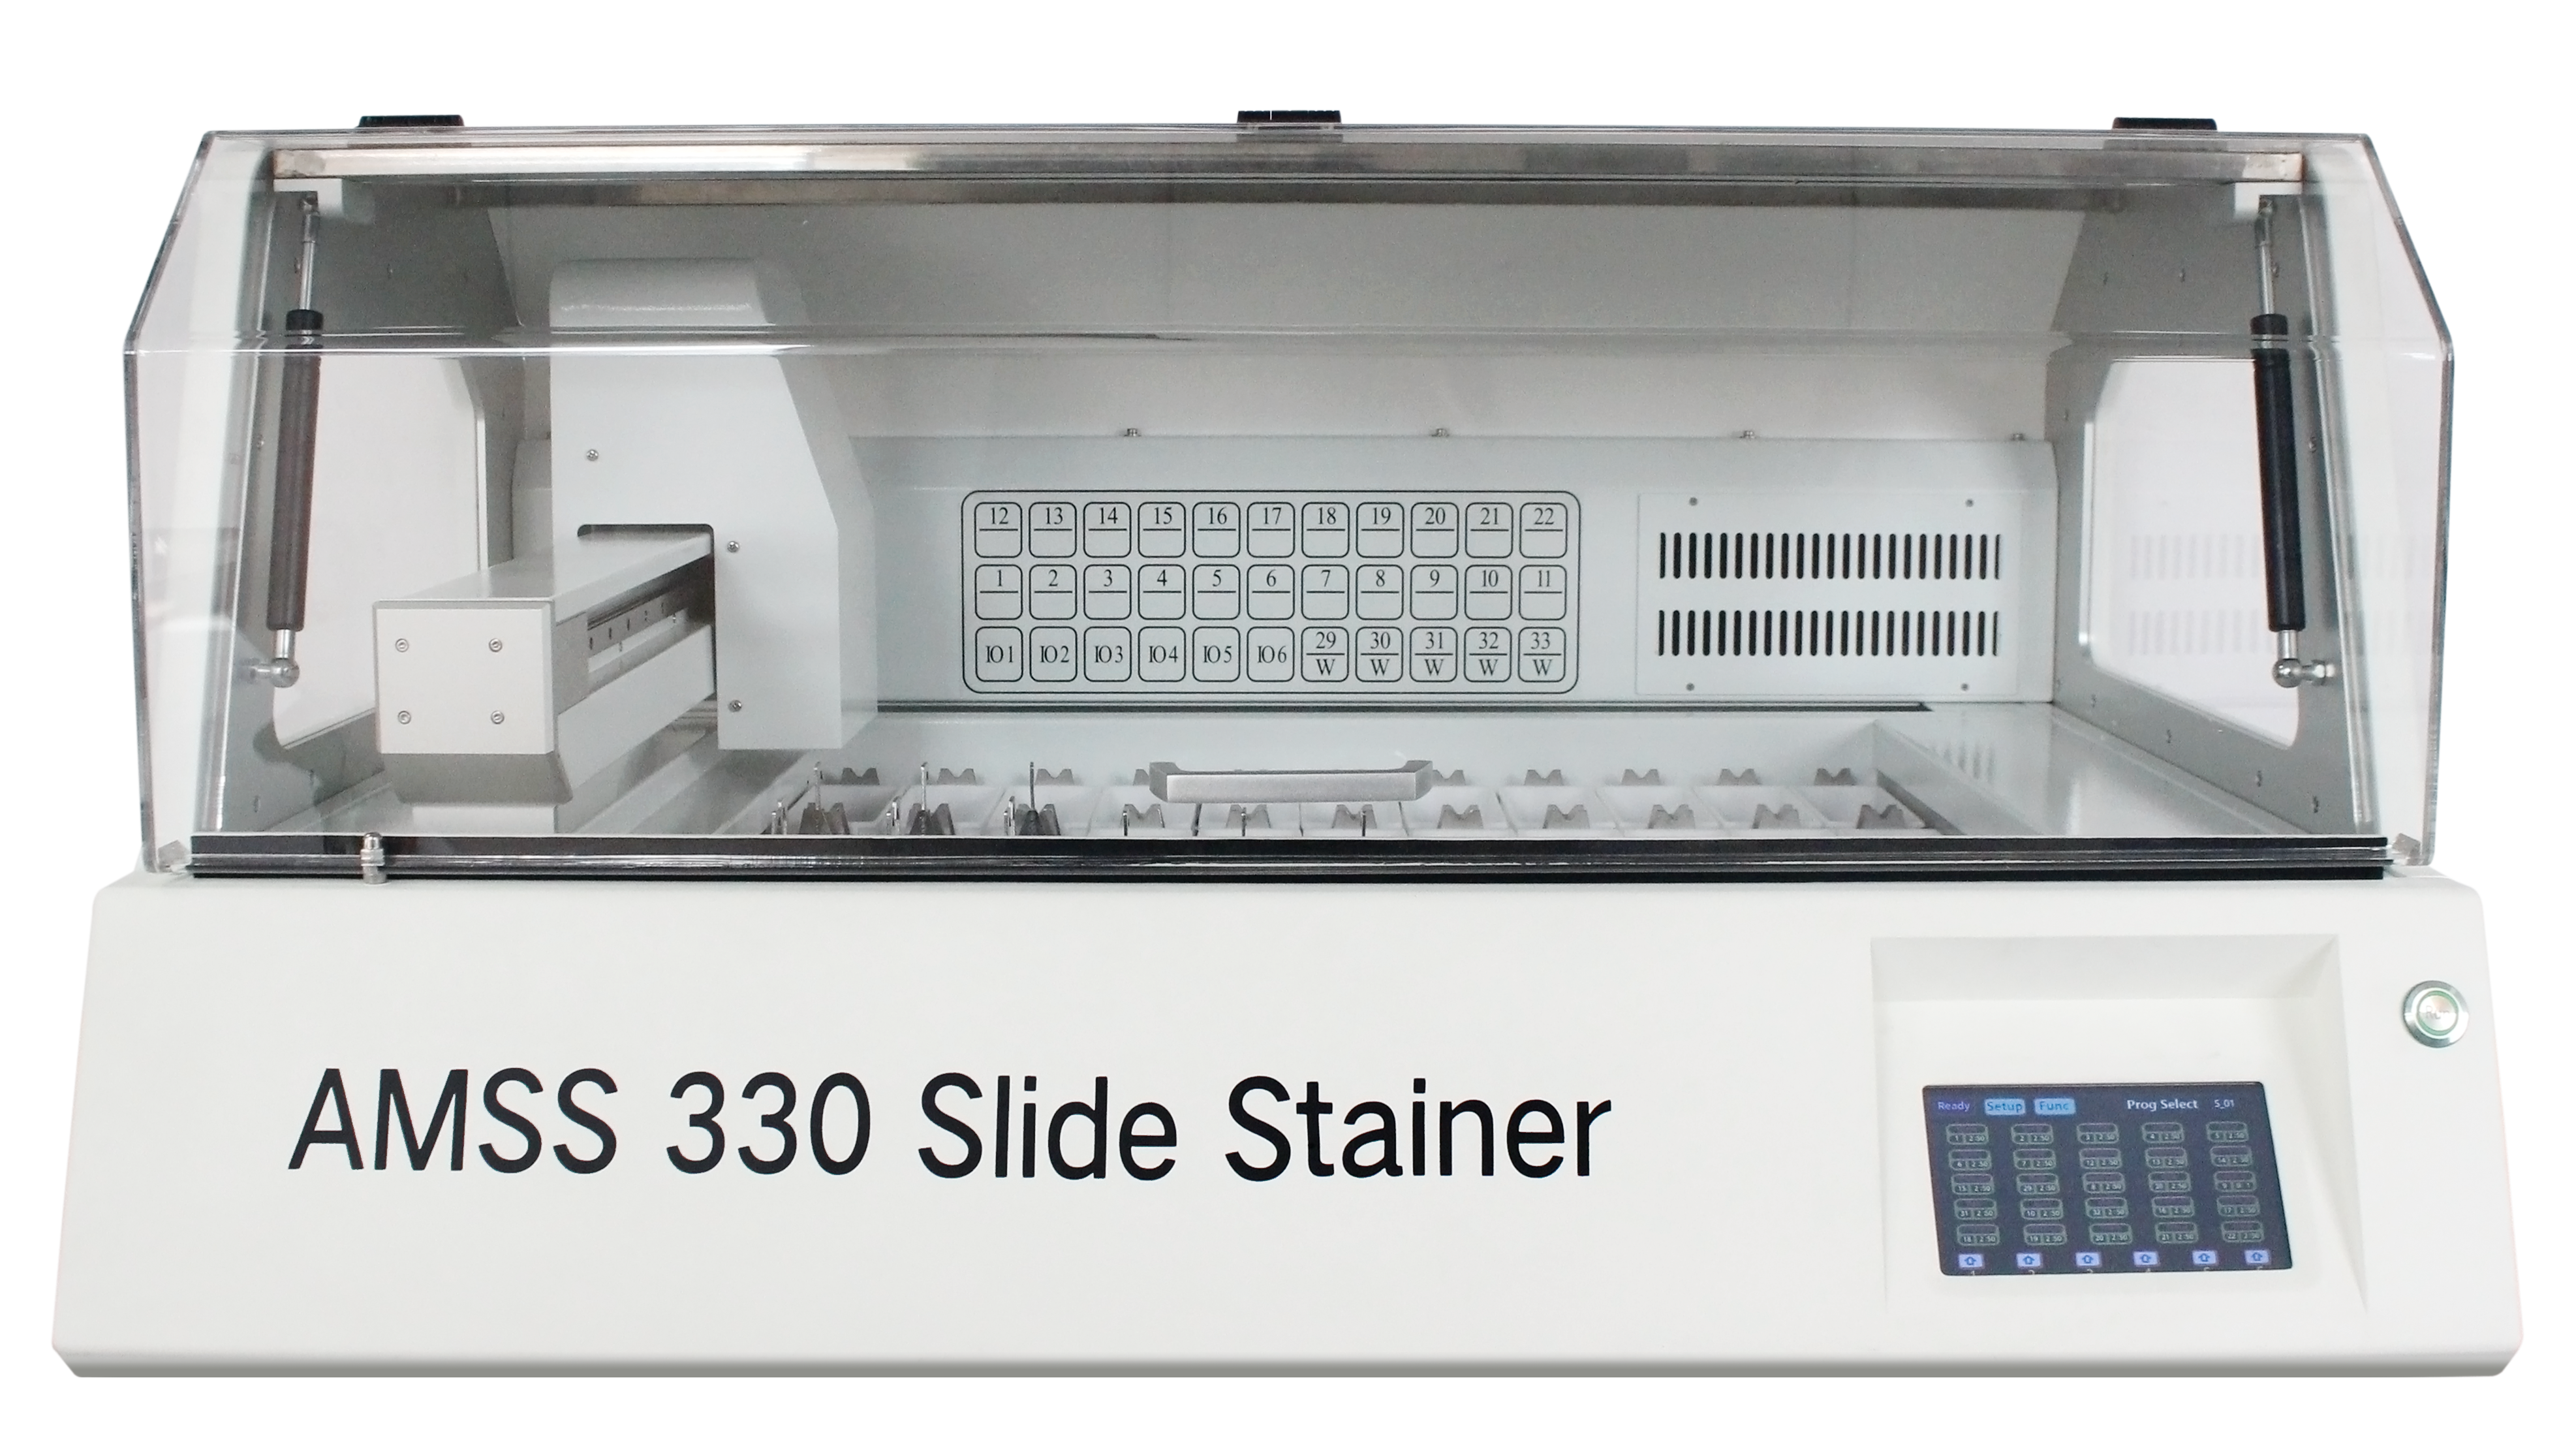 AMSS330 Multi Slide Stainer with Separate Control Panel